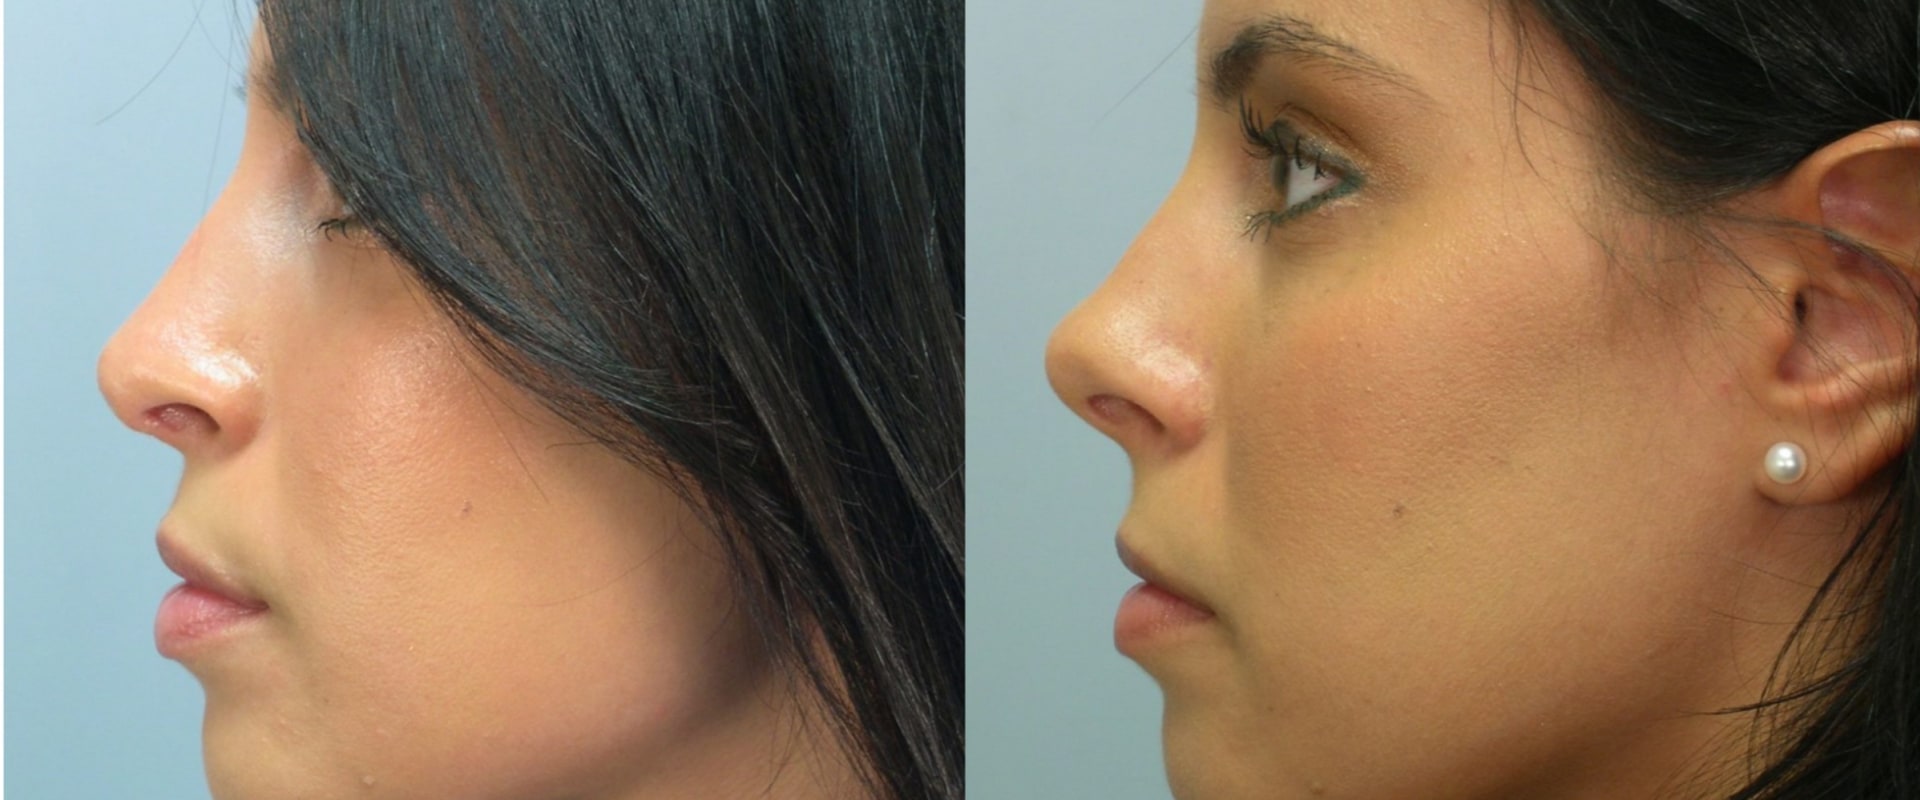 How does insurance cover nose job?